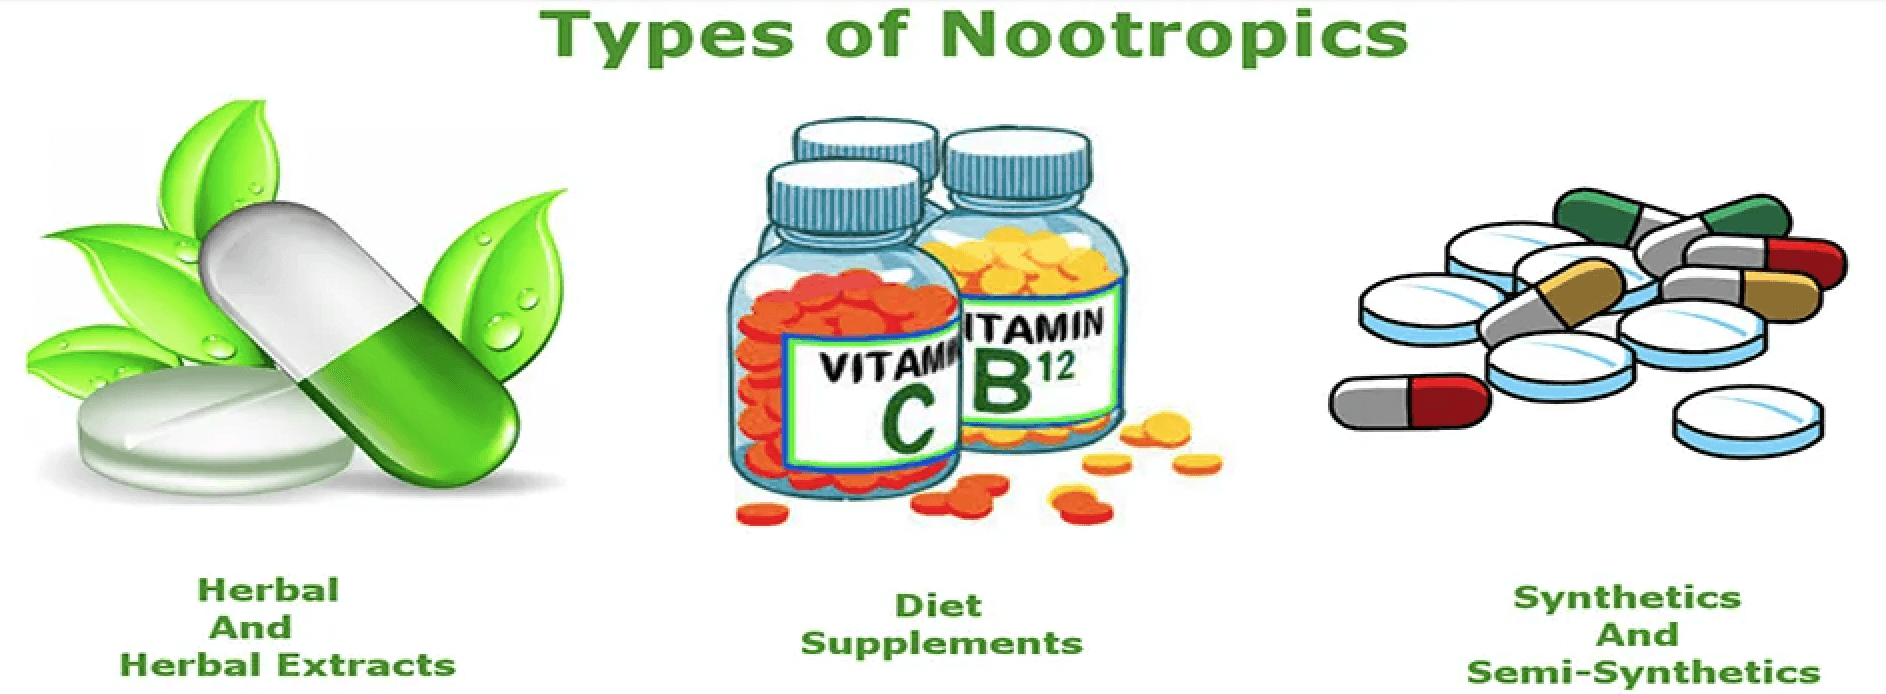 What are nootropics? Definition and examples